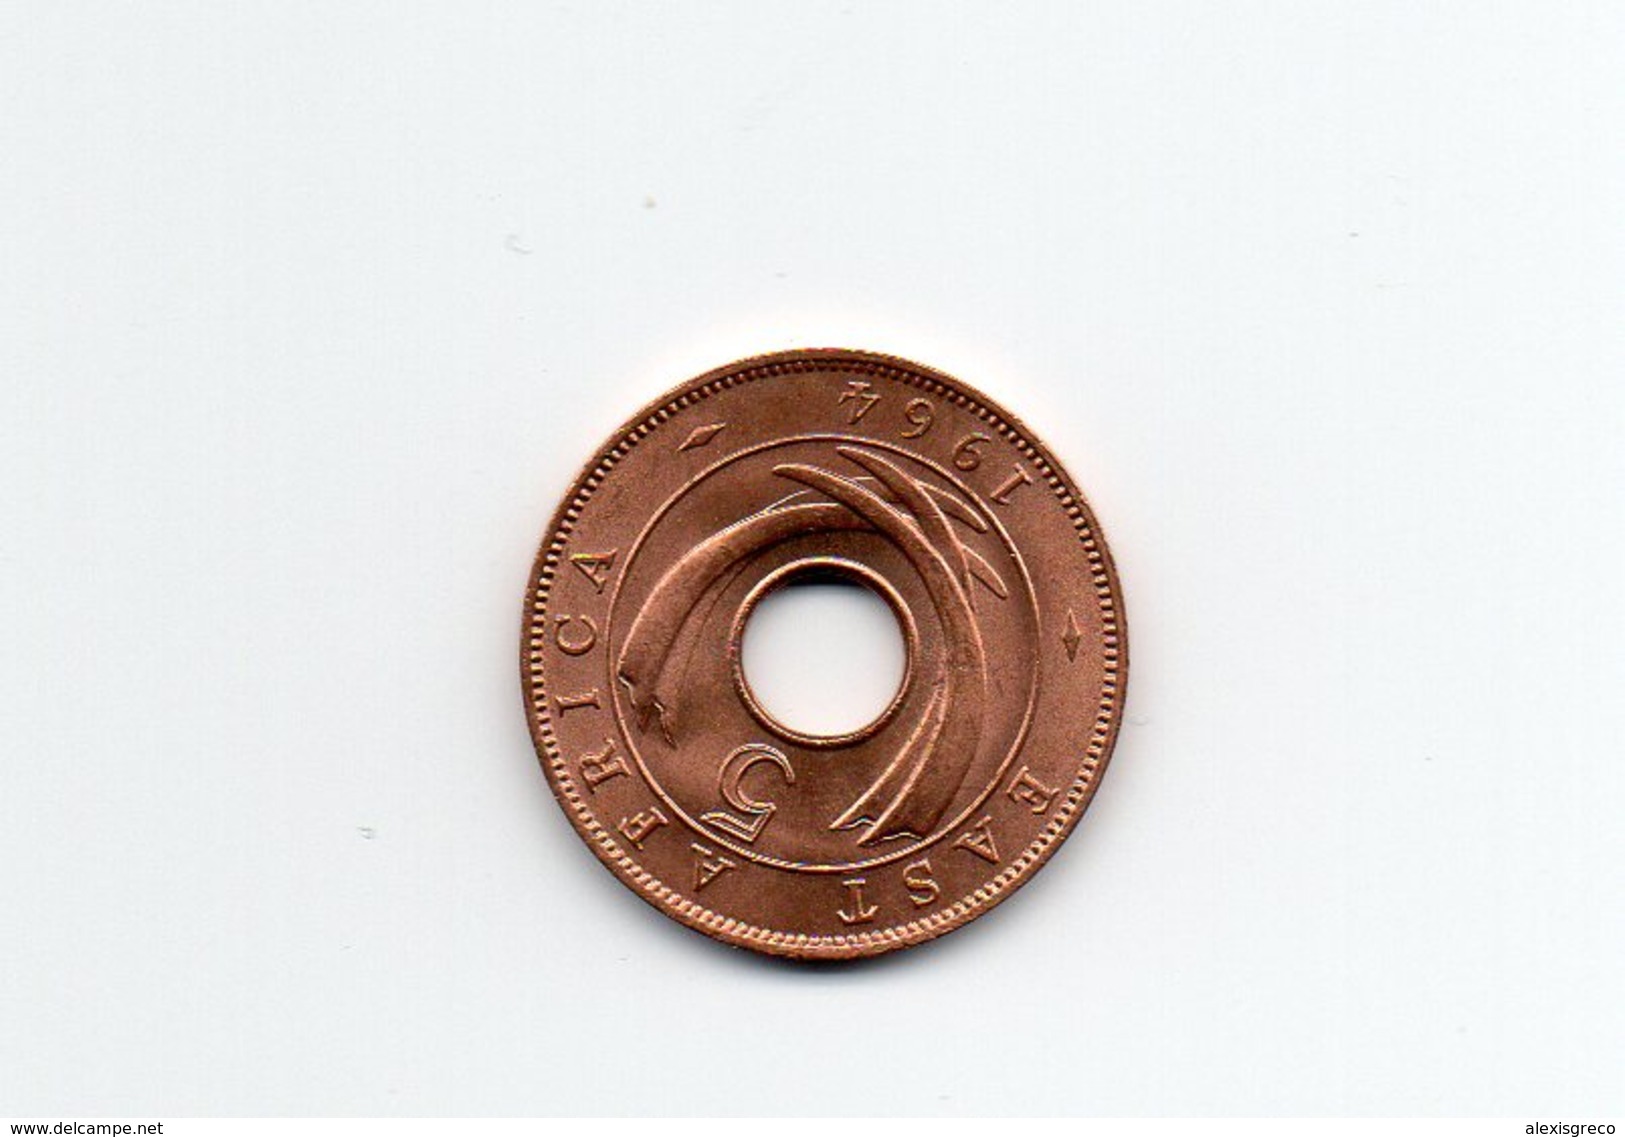 BRITISH EAST AFRICA 1964 UNCIRCULATED COIN FIVE CENTS BRONZE (Post-Independence Issue). - Colonia Británica